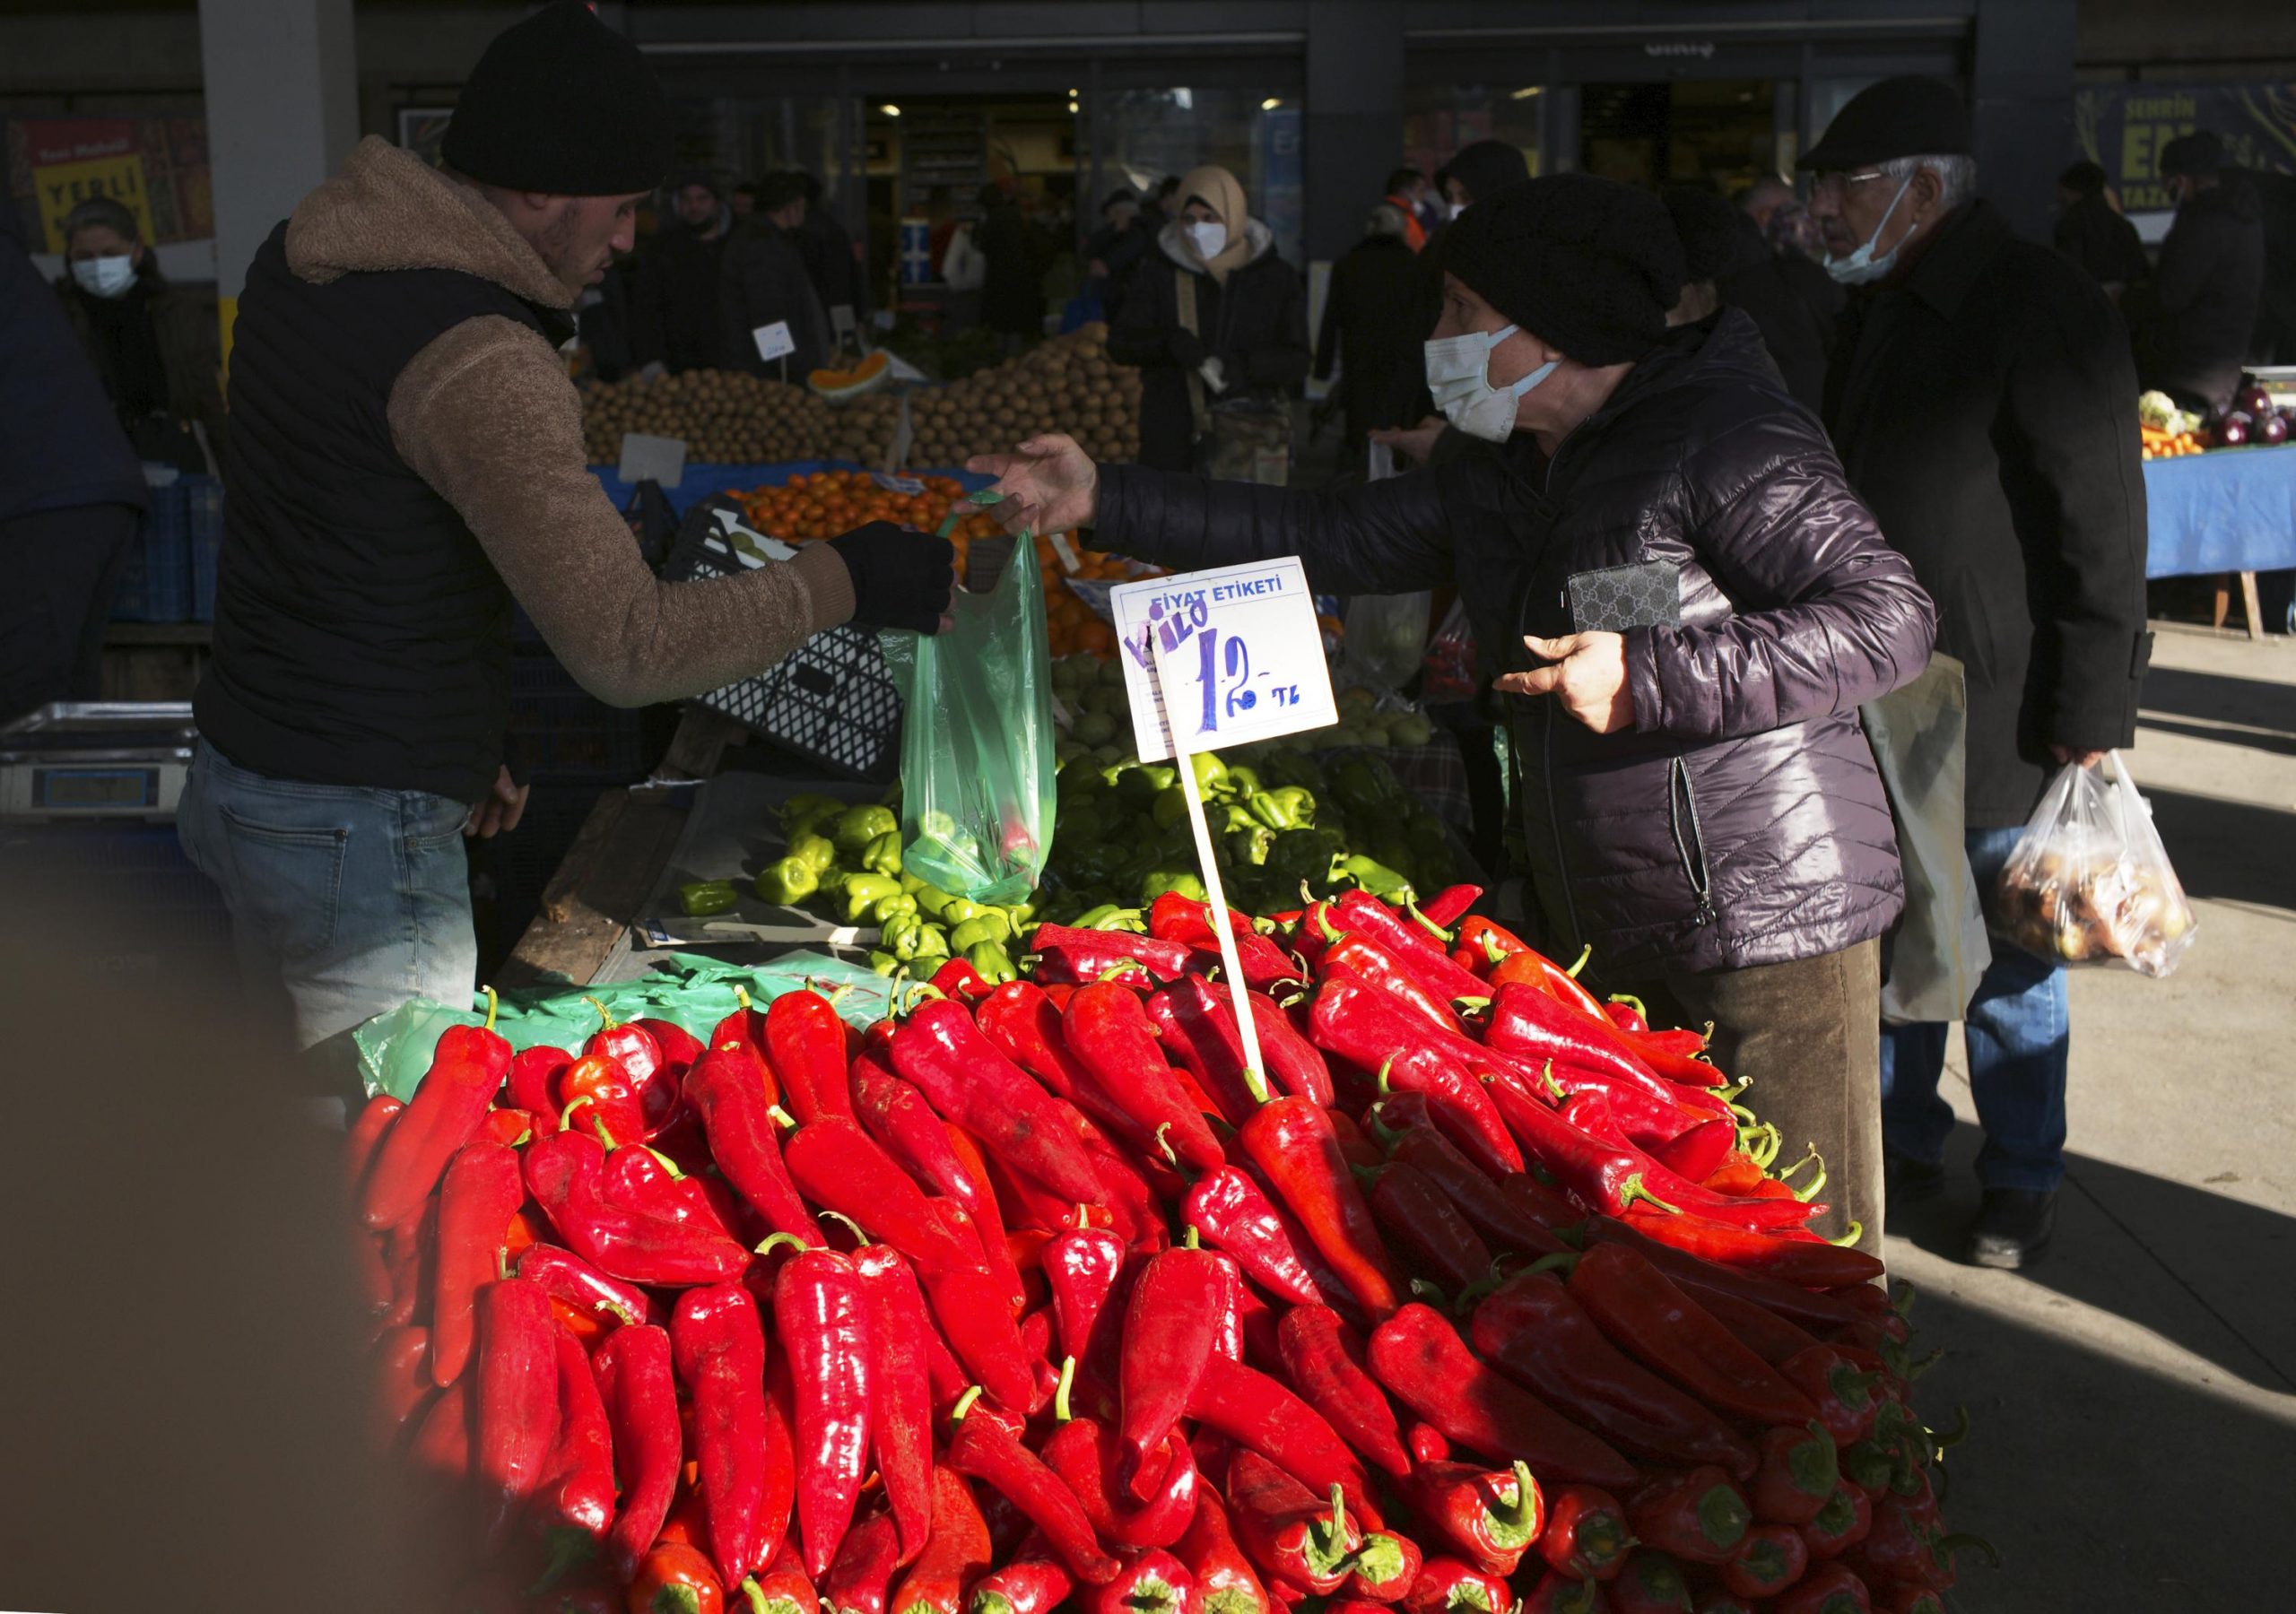 Turkey's inflation hits 54%, deepening cost-of-living woes 2